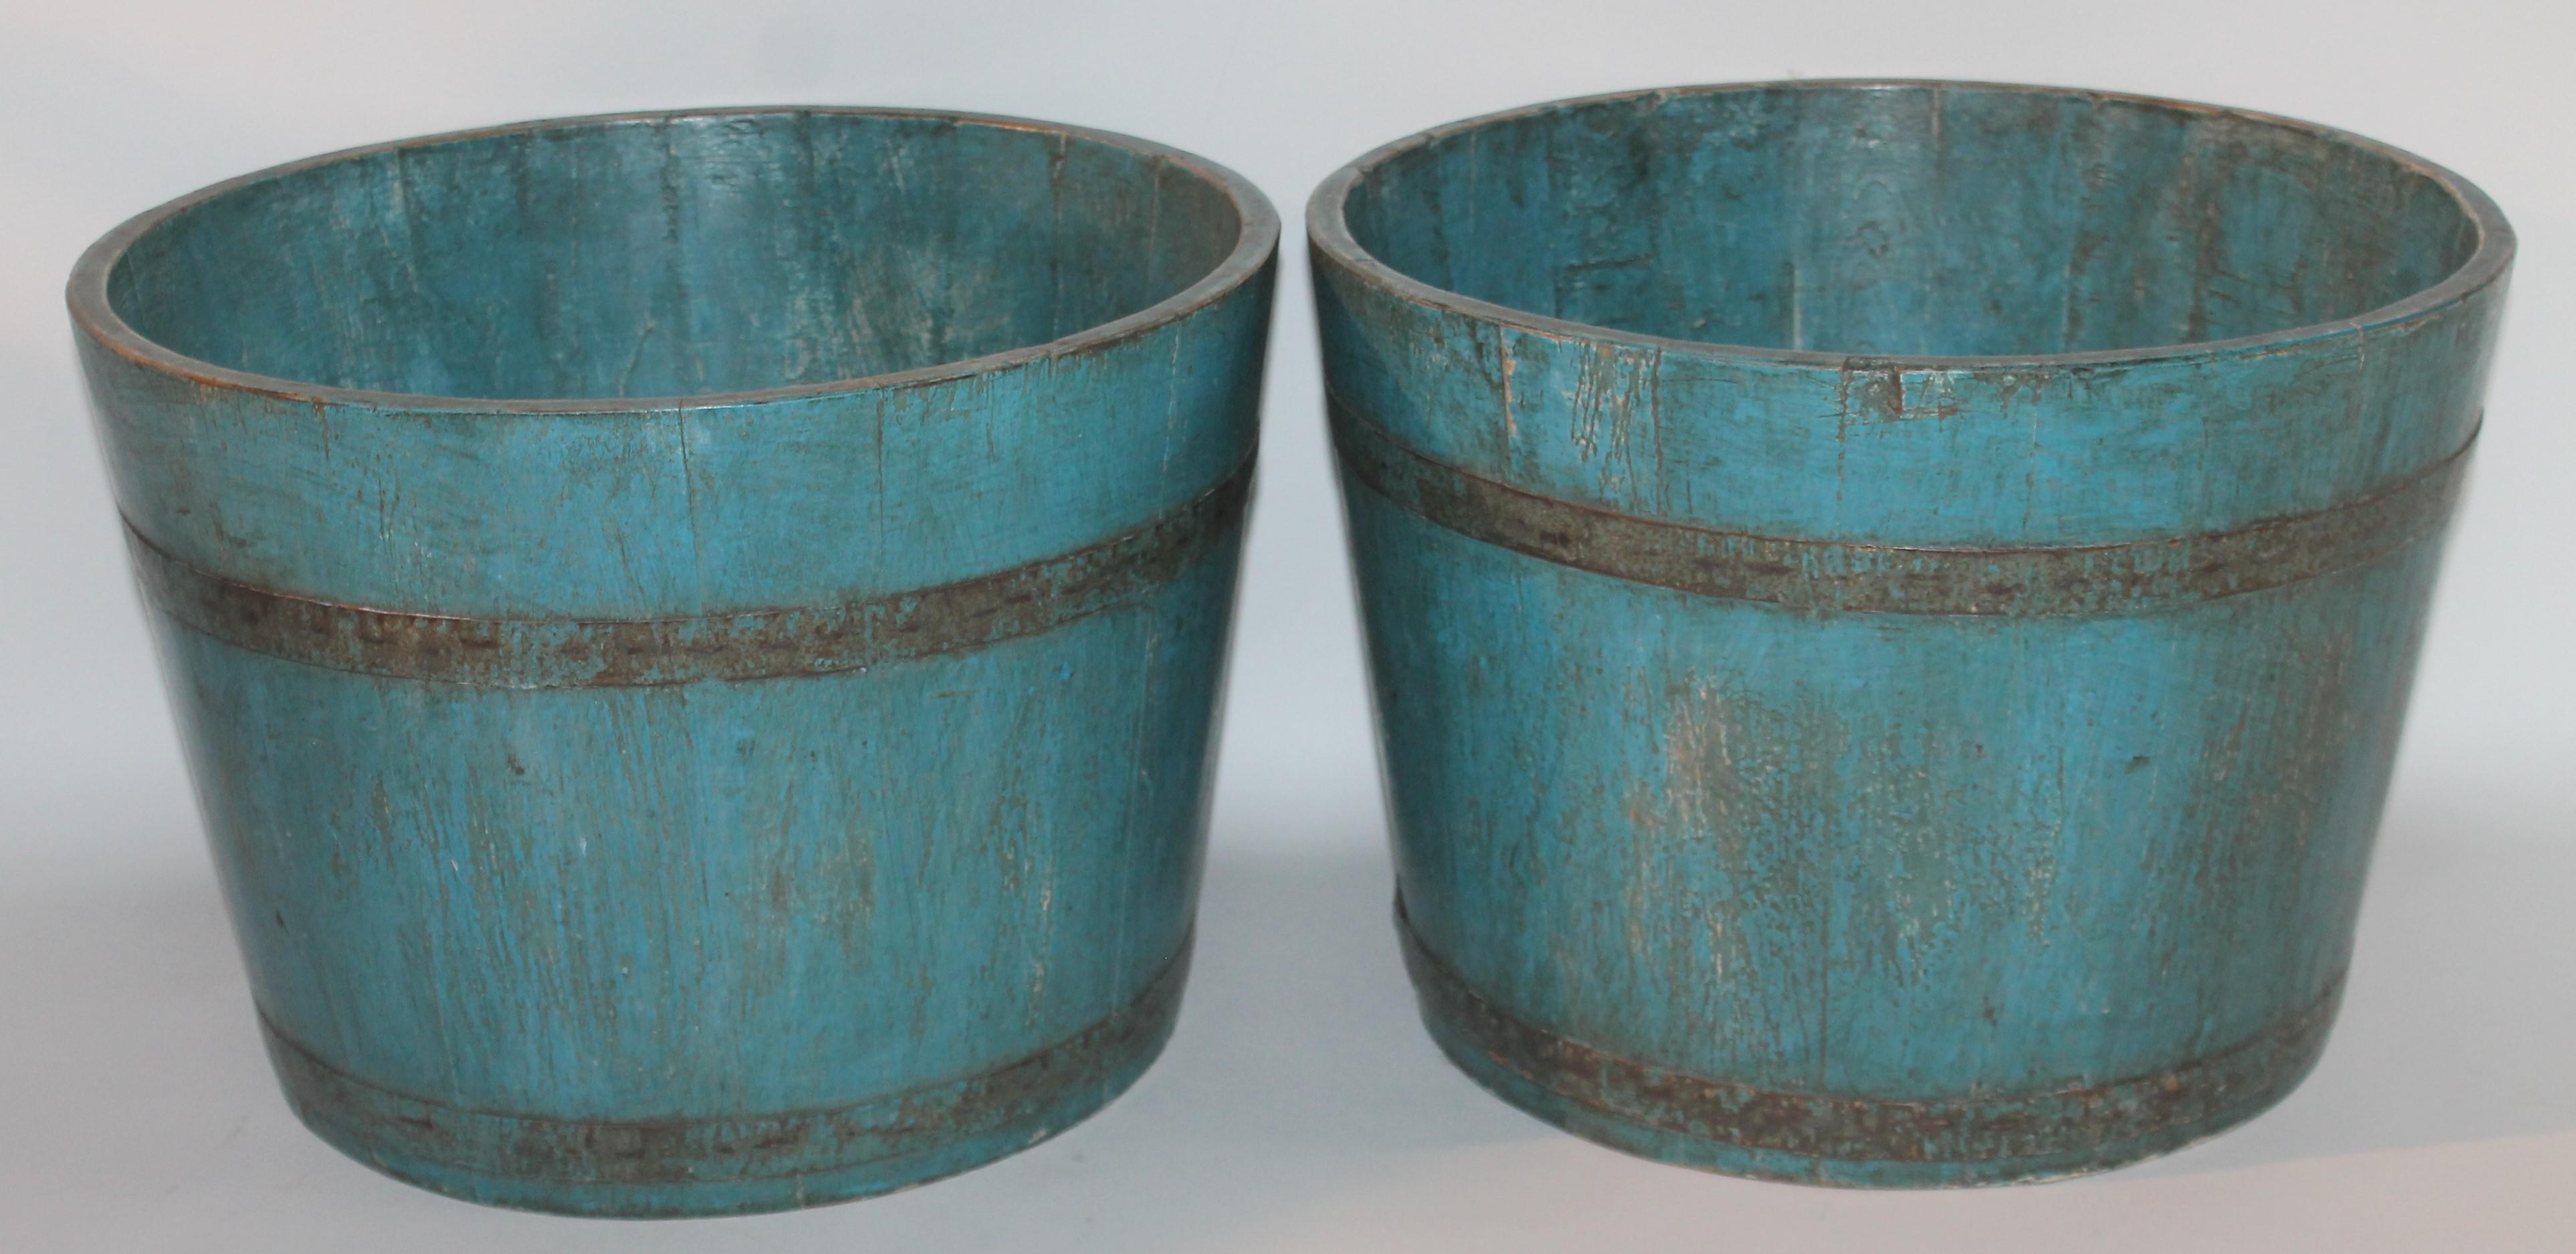 These amazing original powder blue buckets or planters are very strong and sturdy. The condition is very good and have a waxed or weather protector finish on them. Fantastic robin egg blue with metal bands holding them together.